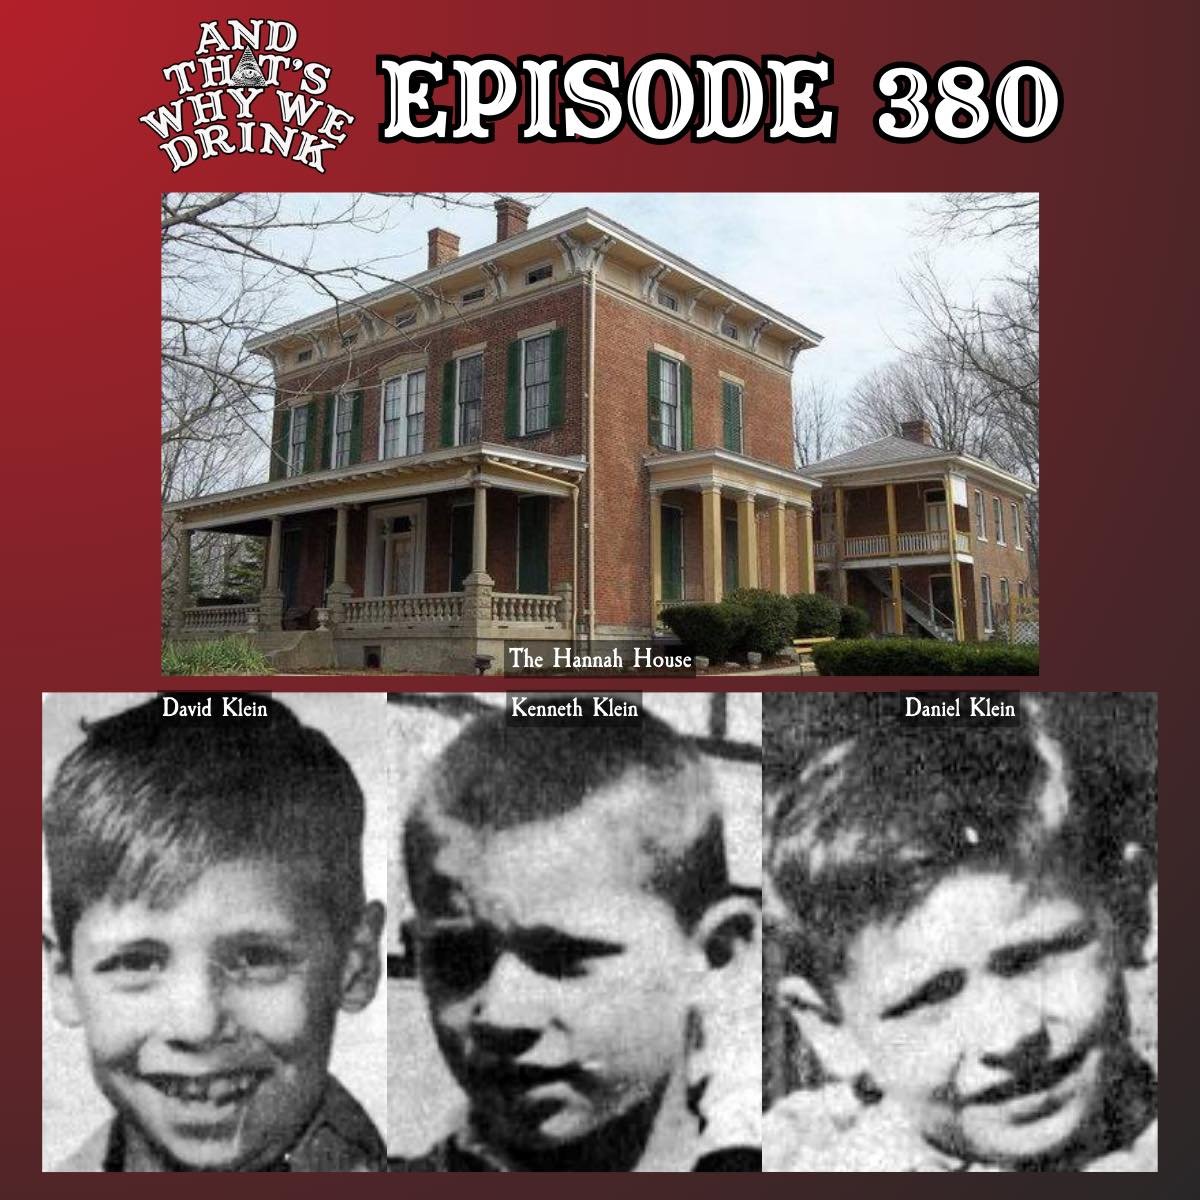 Episode 380 is here this week Em takes us to the house with many rooms, and many fireplaces, the Hannah House in Indiana. Then Christine brings us to Minneapolis for the unsolved disappearance of the Klein brothers. And if you have any tips on how to